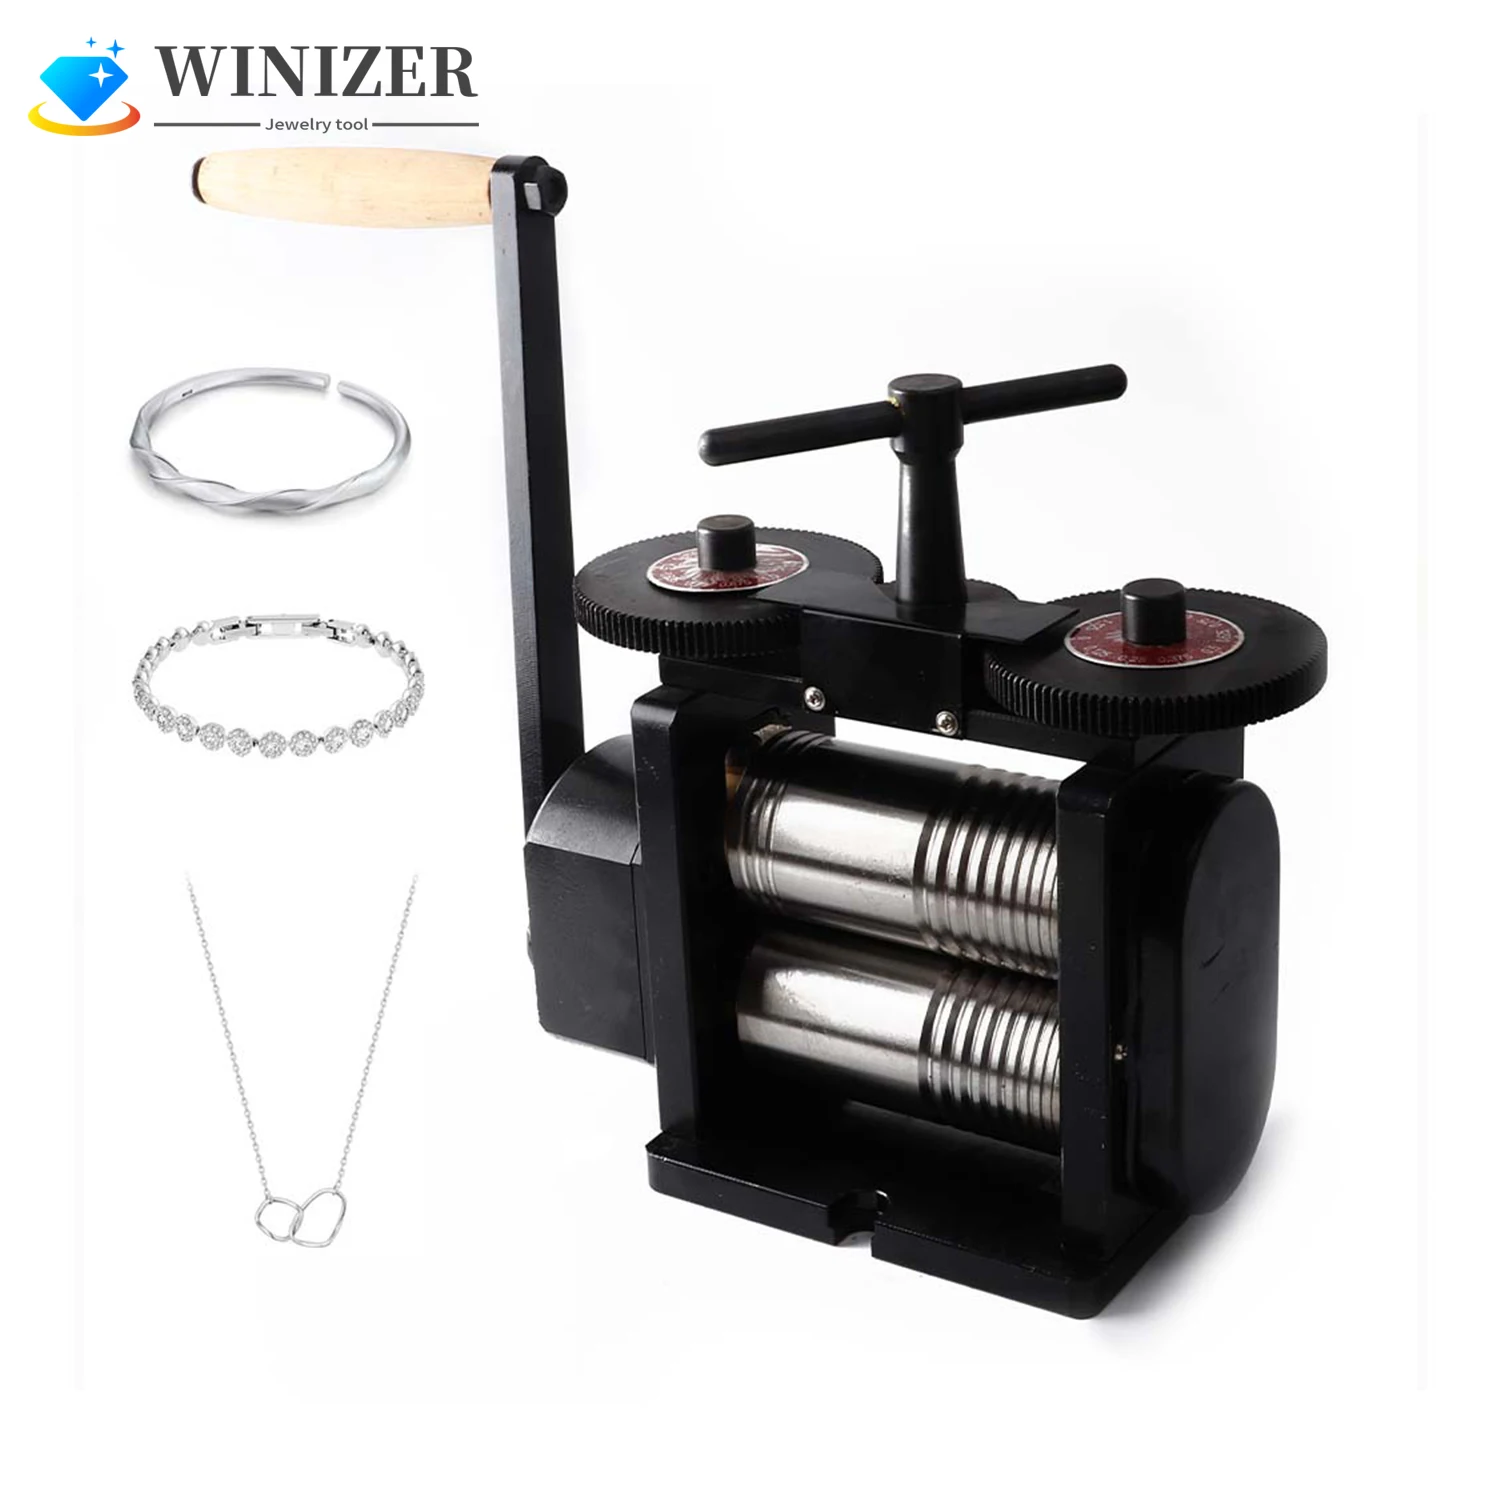 Rolling Mill Machine Jewelry Making Manual Hand Crank Tableting Jewelry Press Tool For Metal Sheet Wire Rolling Jewelry DIY Tool